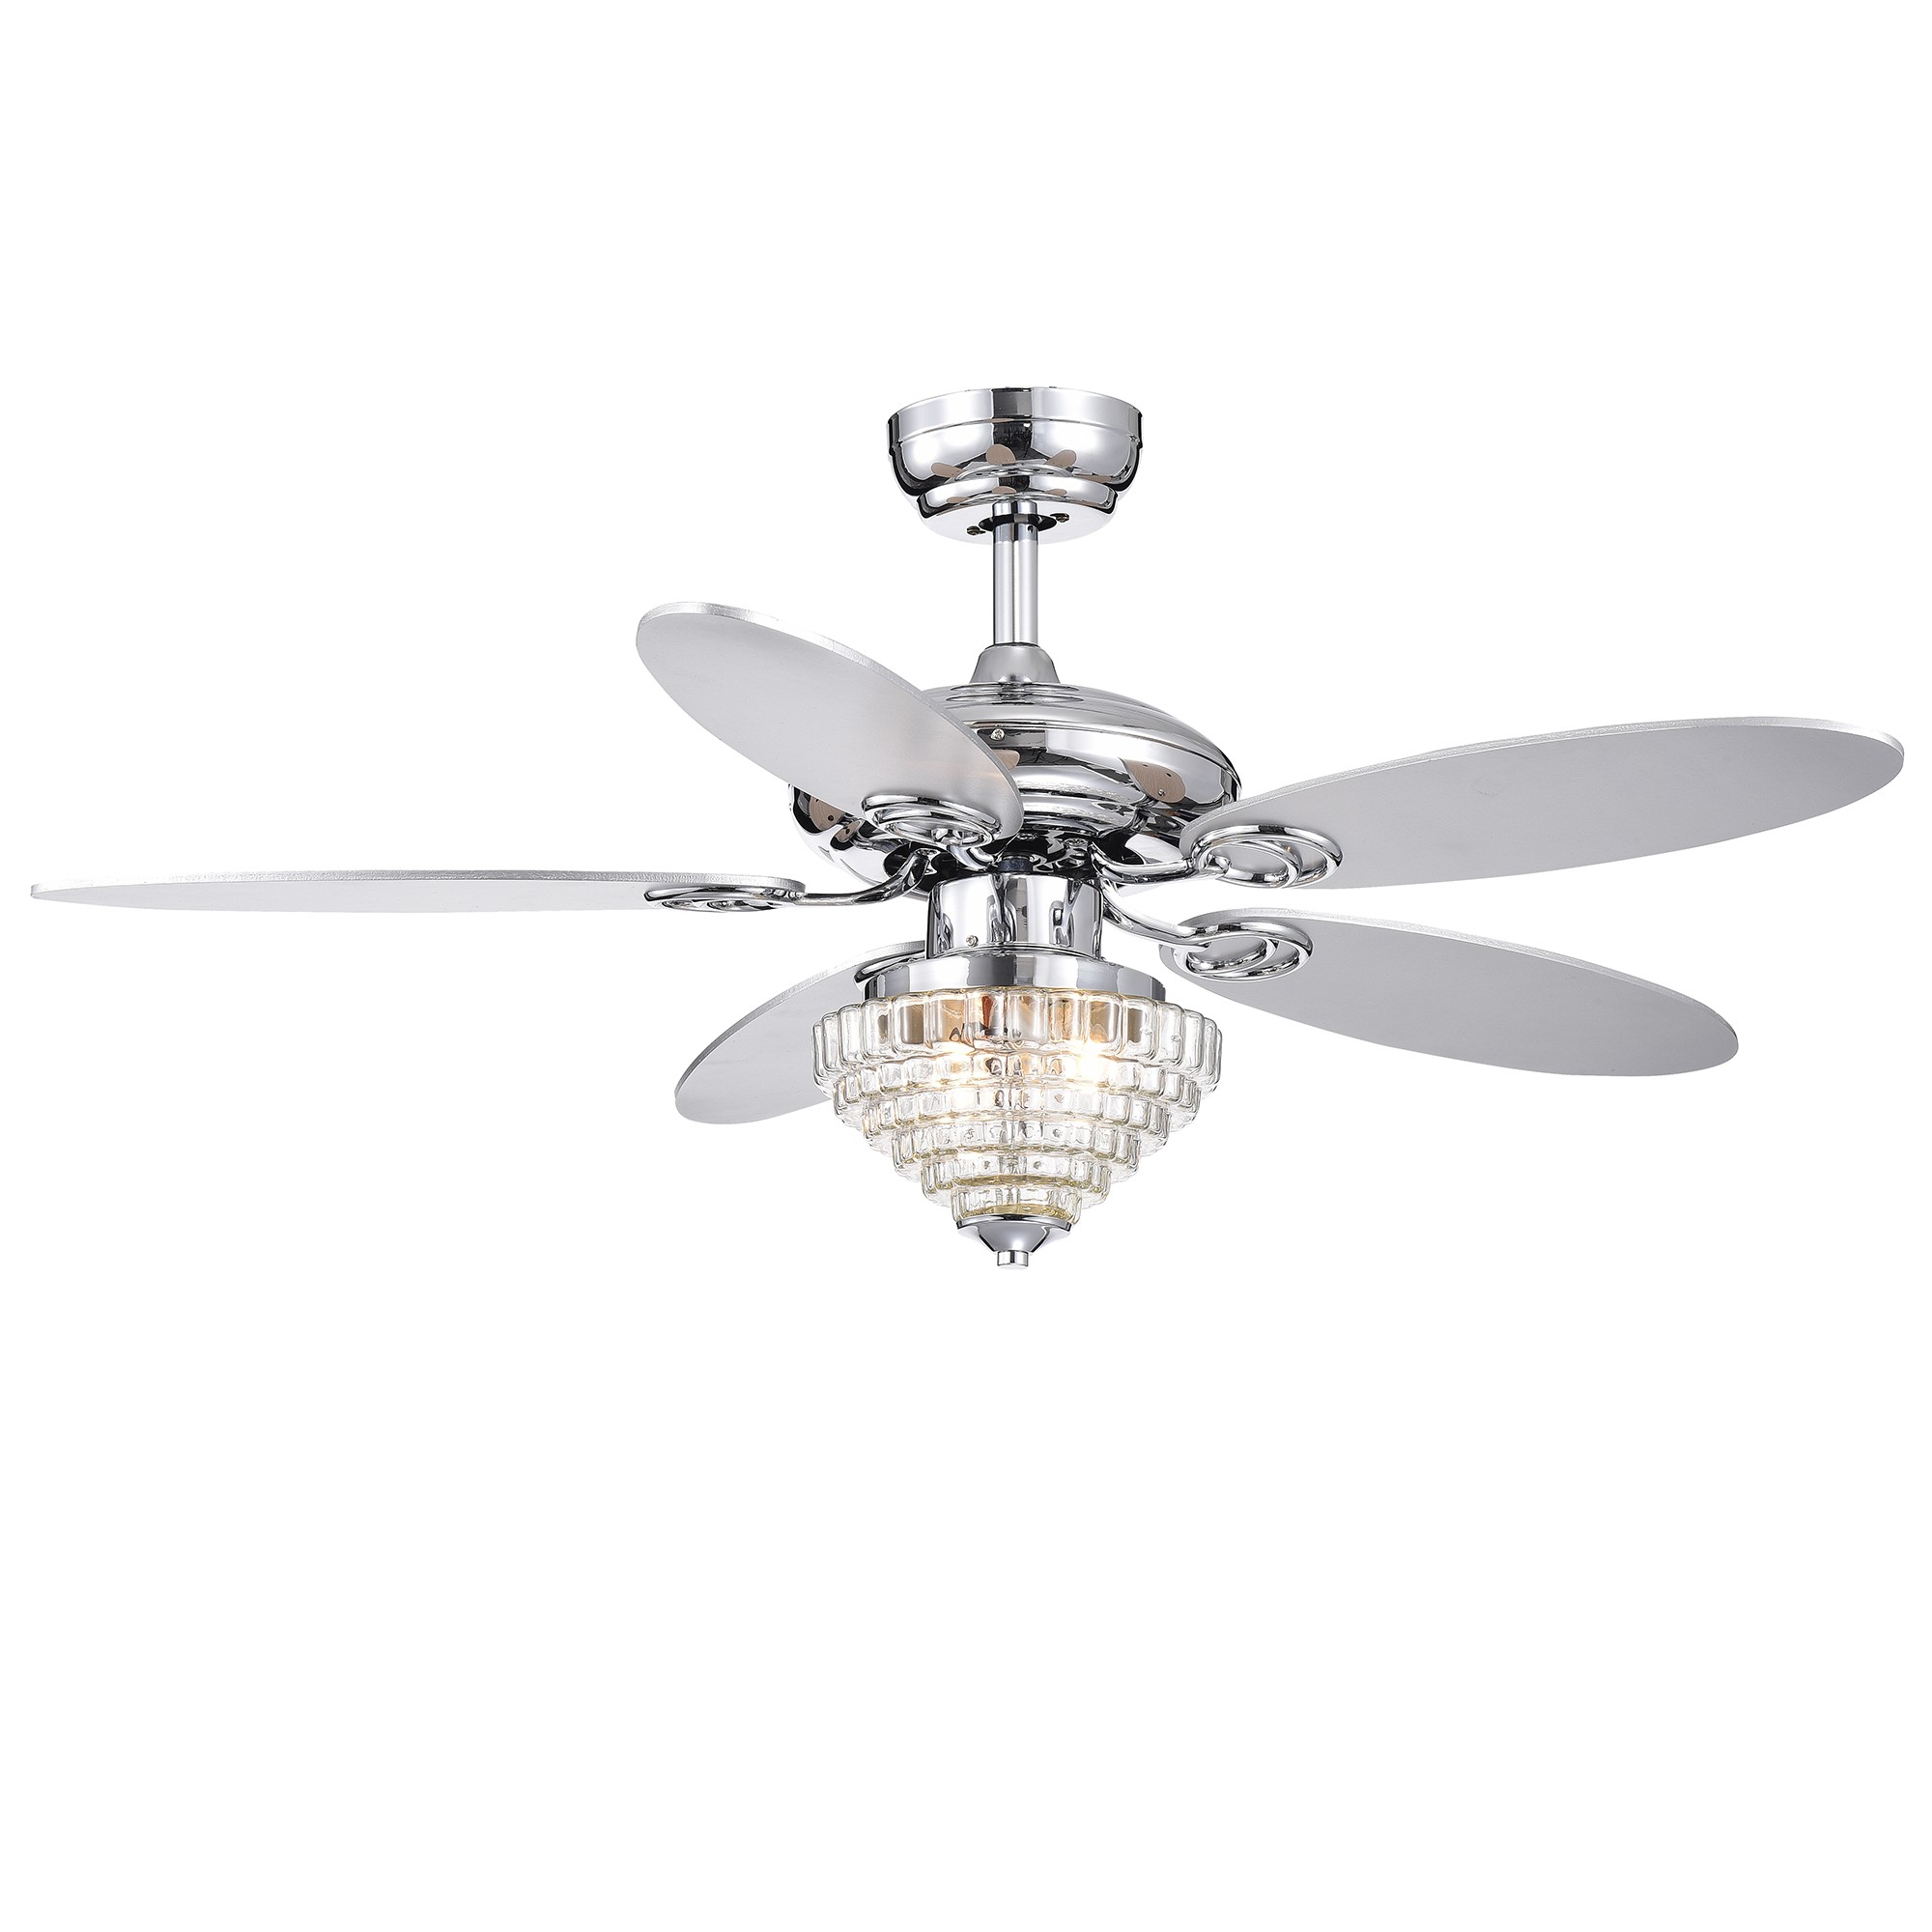 Copper Grove Kostenets 42-inch RC Lighted Ceiling Fan w/ Stepped Glass Shade/Reversible Blades